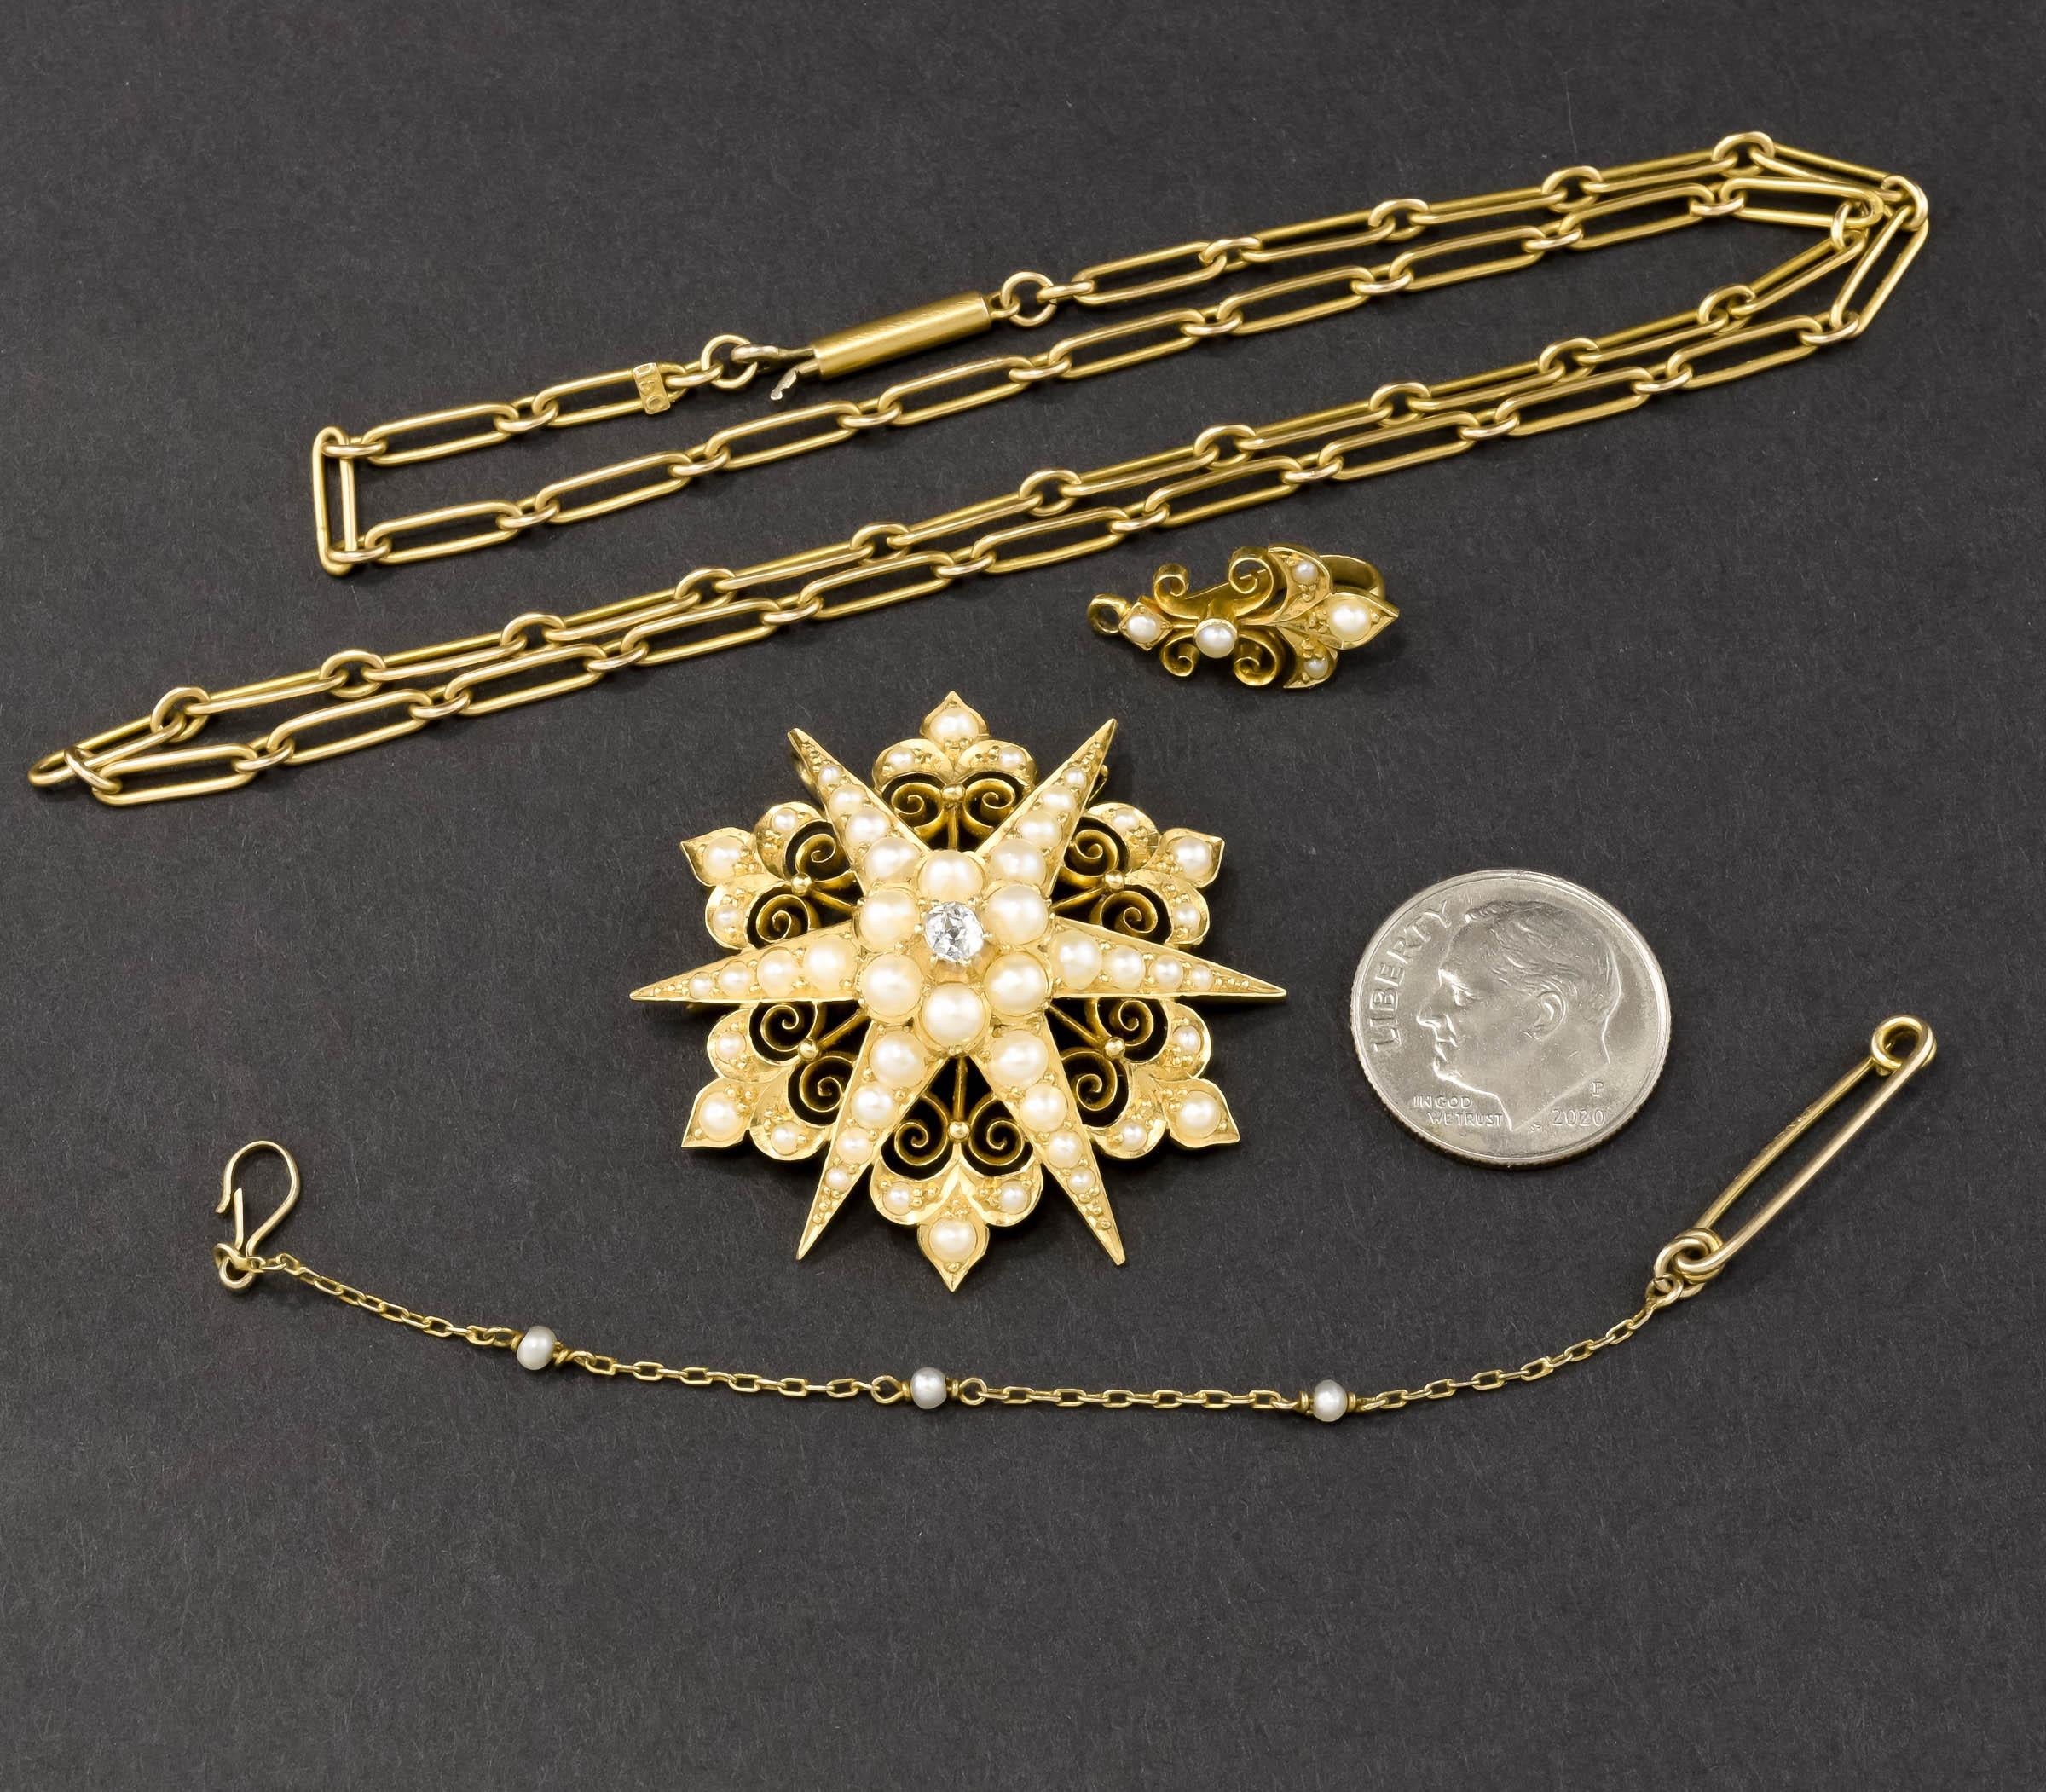 Women's Antique Celestial Star Pendant - Brooch Necklace Set in Fitted Case For Sale